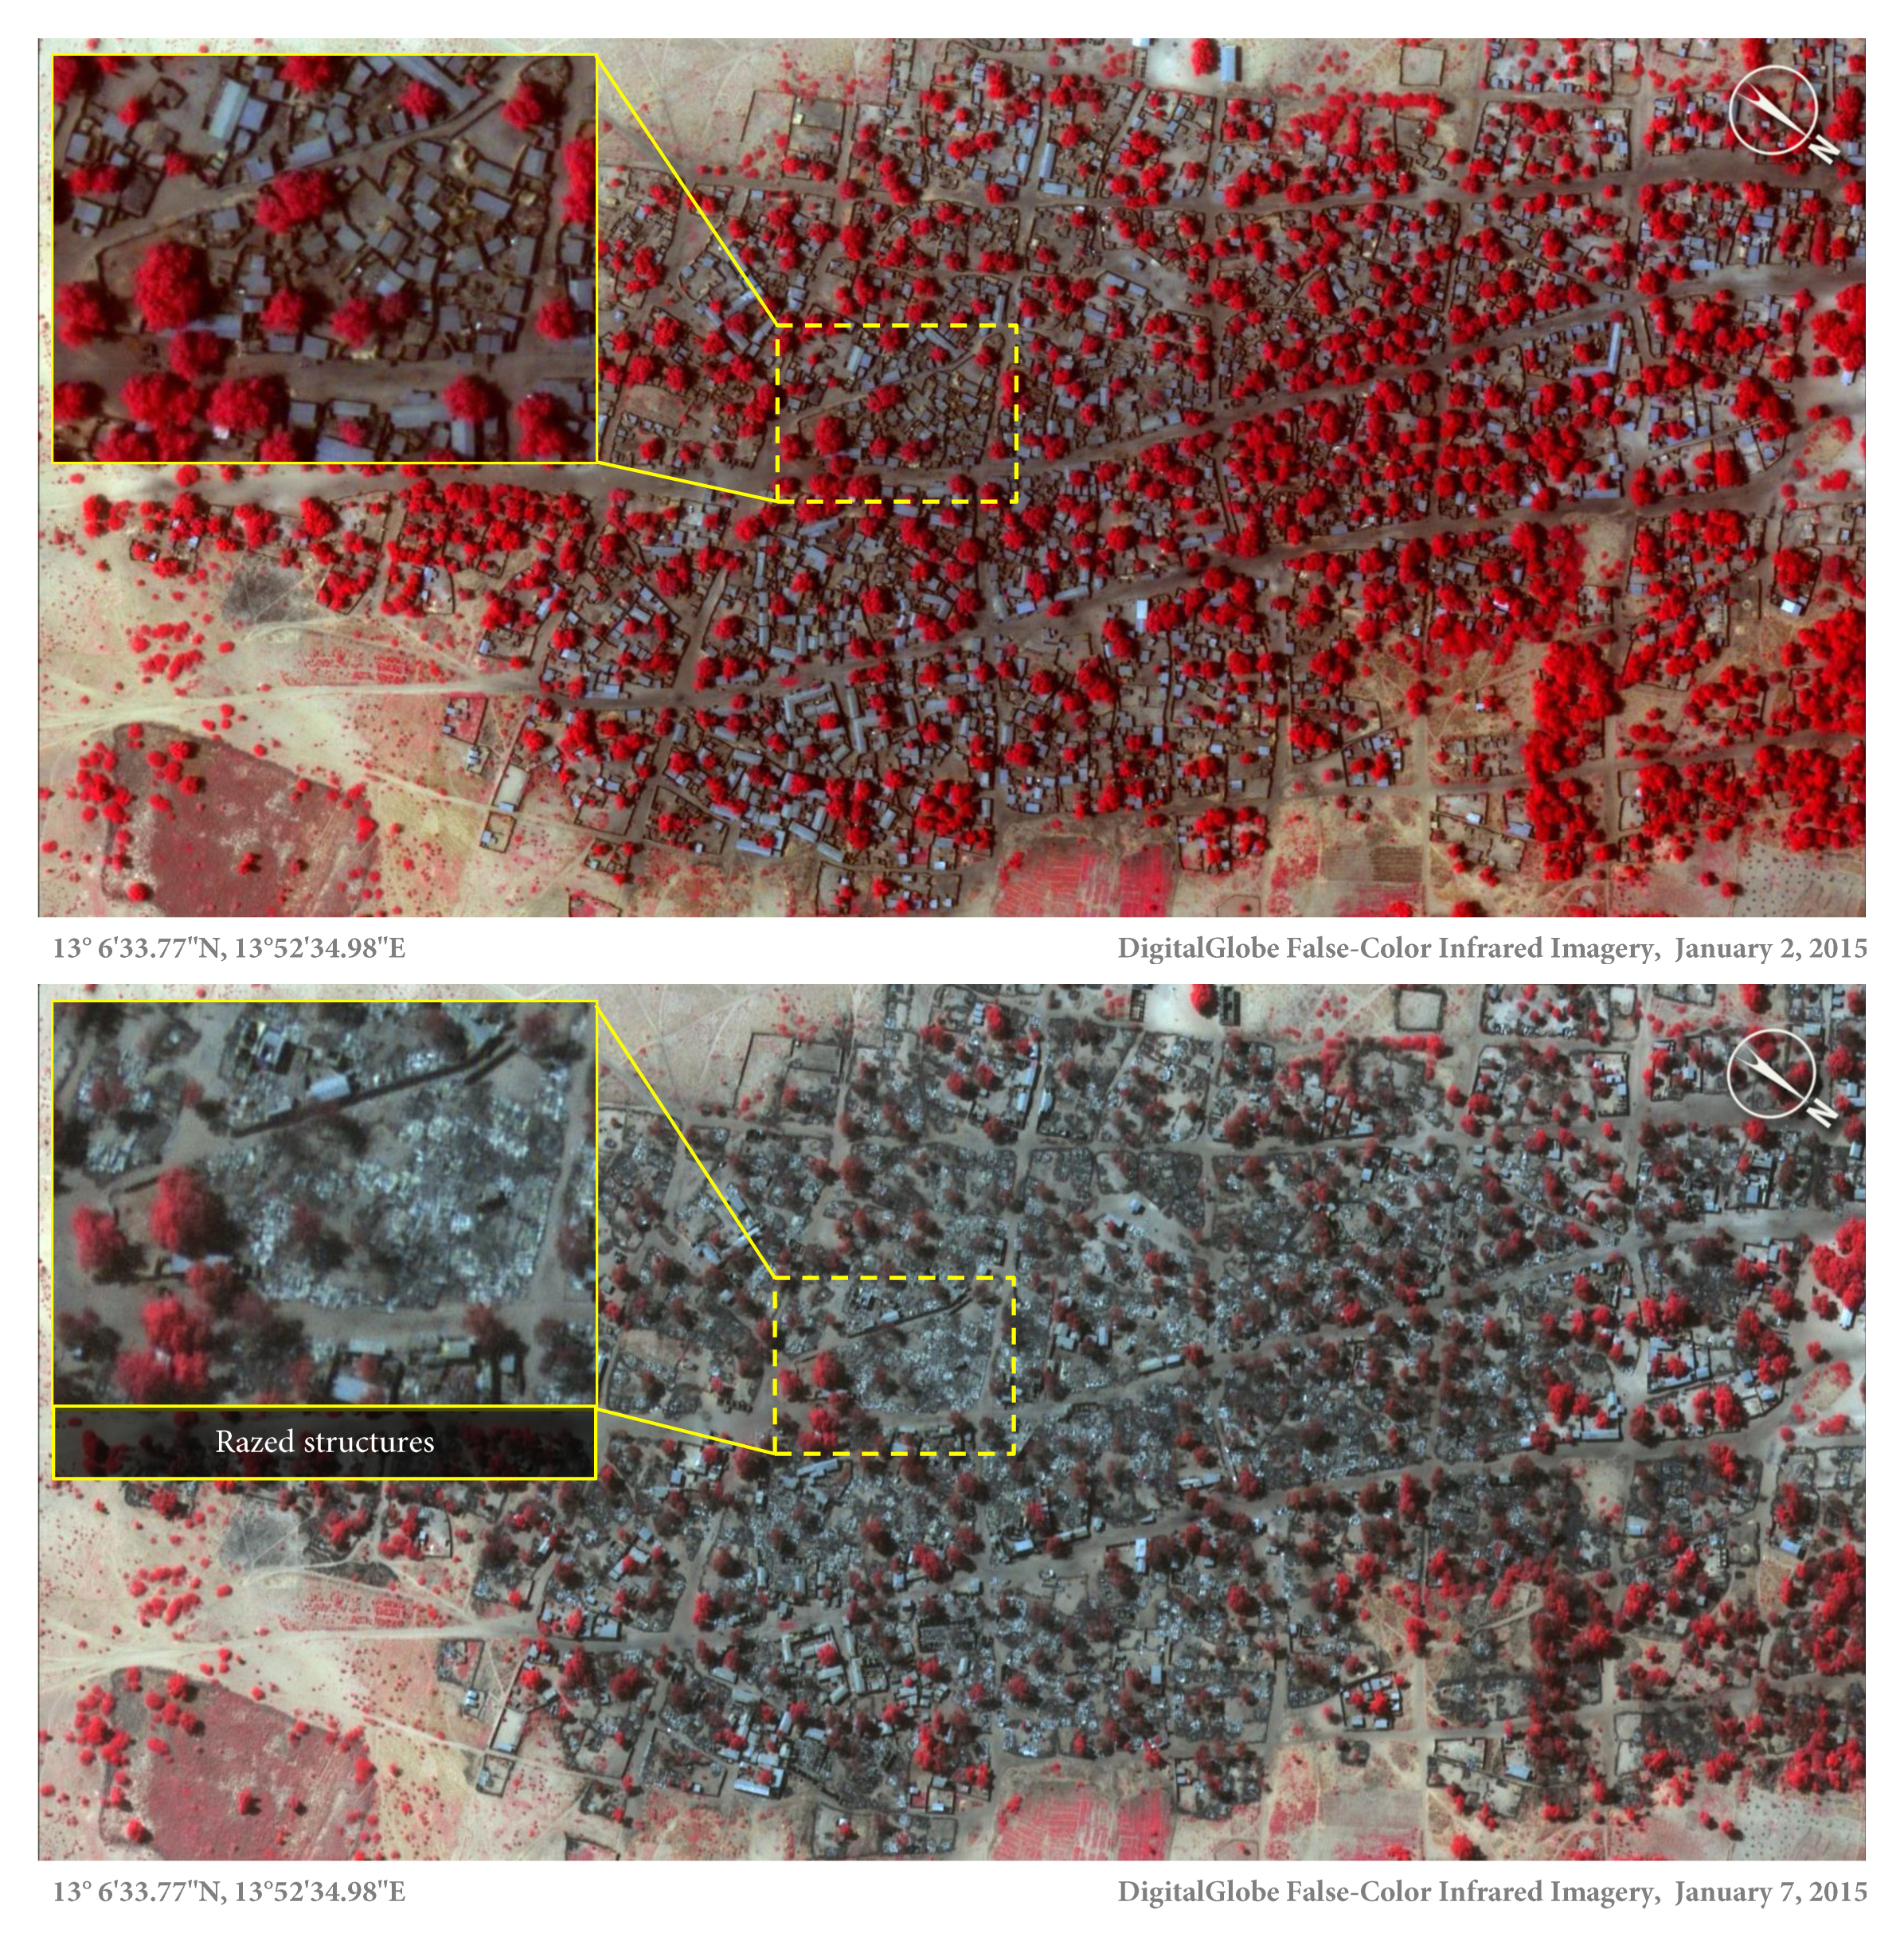 Satellite image of the village of Doro Baga (aka Doro Gowon) in north-eastern Nigeria taken on 2 Jan 2015. Image shows an example of the densely packed structures and tree cover. Satellite image 2, taken on 7 Jan 2015, shows almost all of the structures razed. The inset demonstrates the level of destruction of most structures in the town. The red areas indicate healthy vegetation.